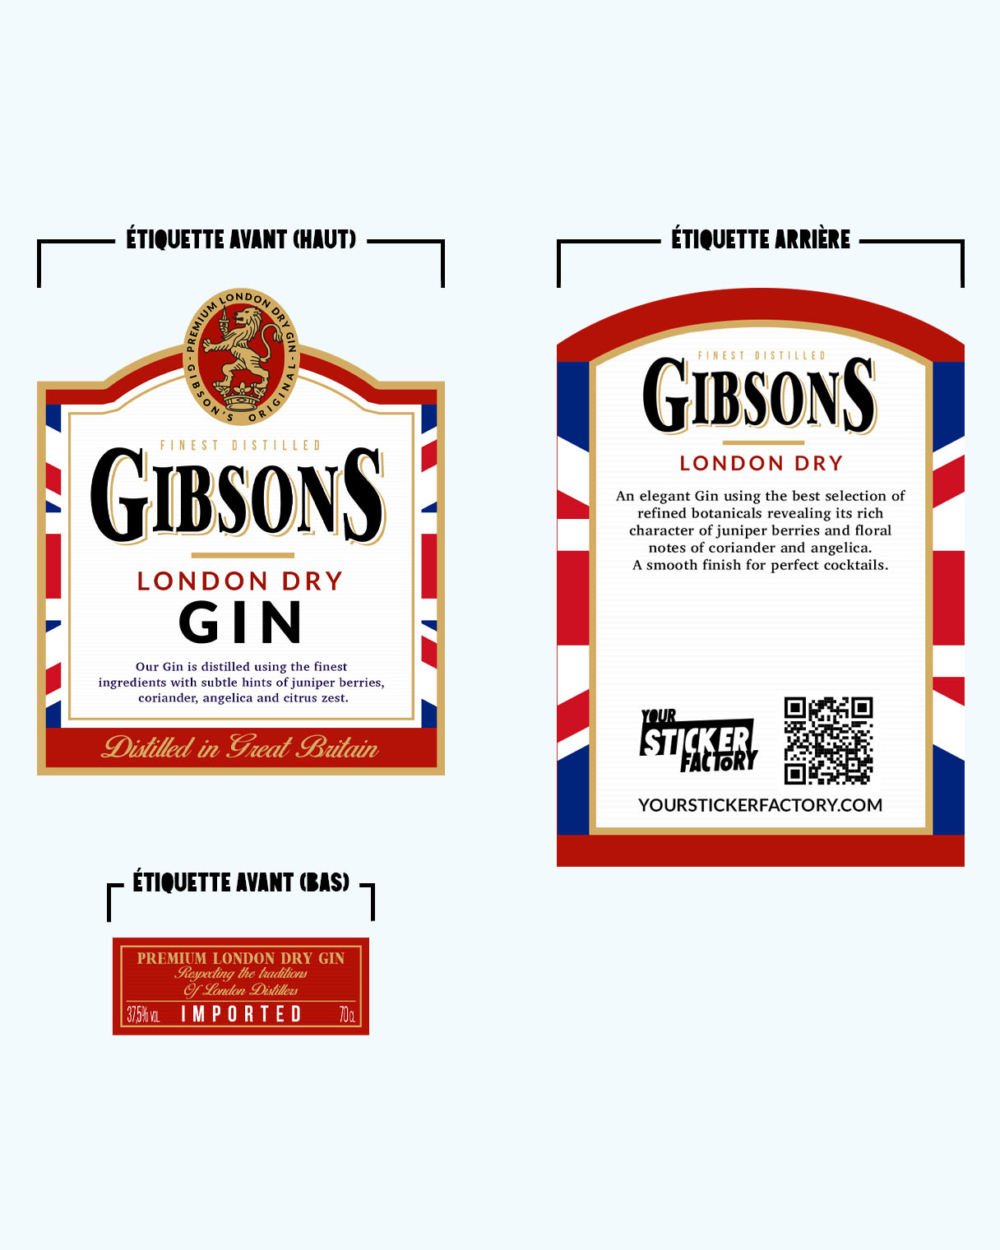 GIBSONS_3